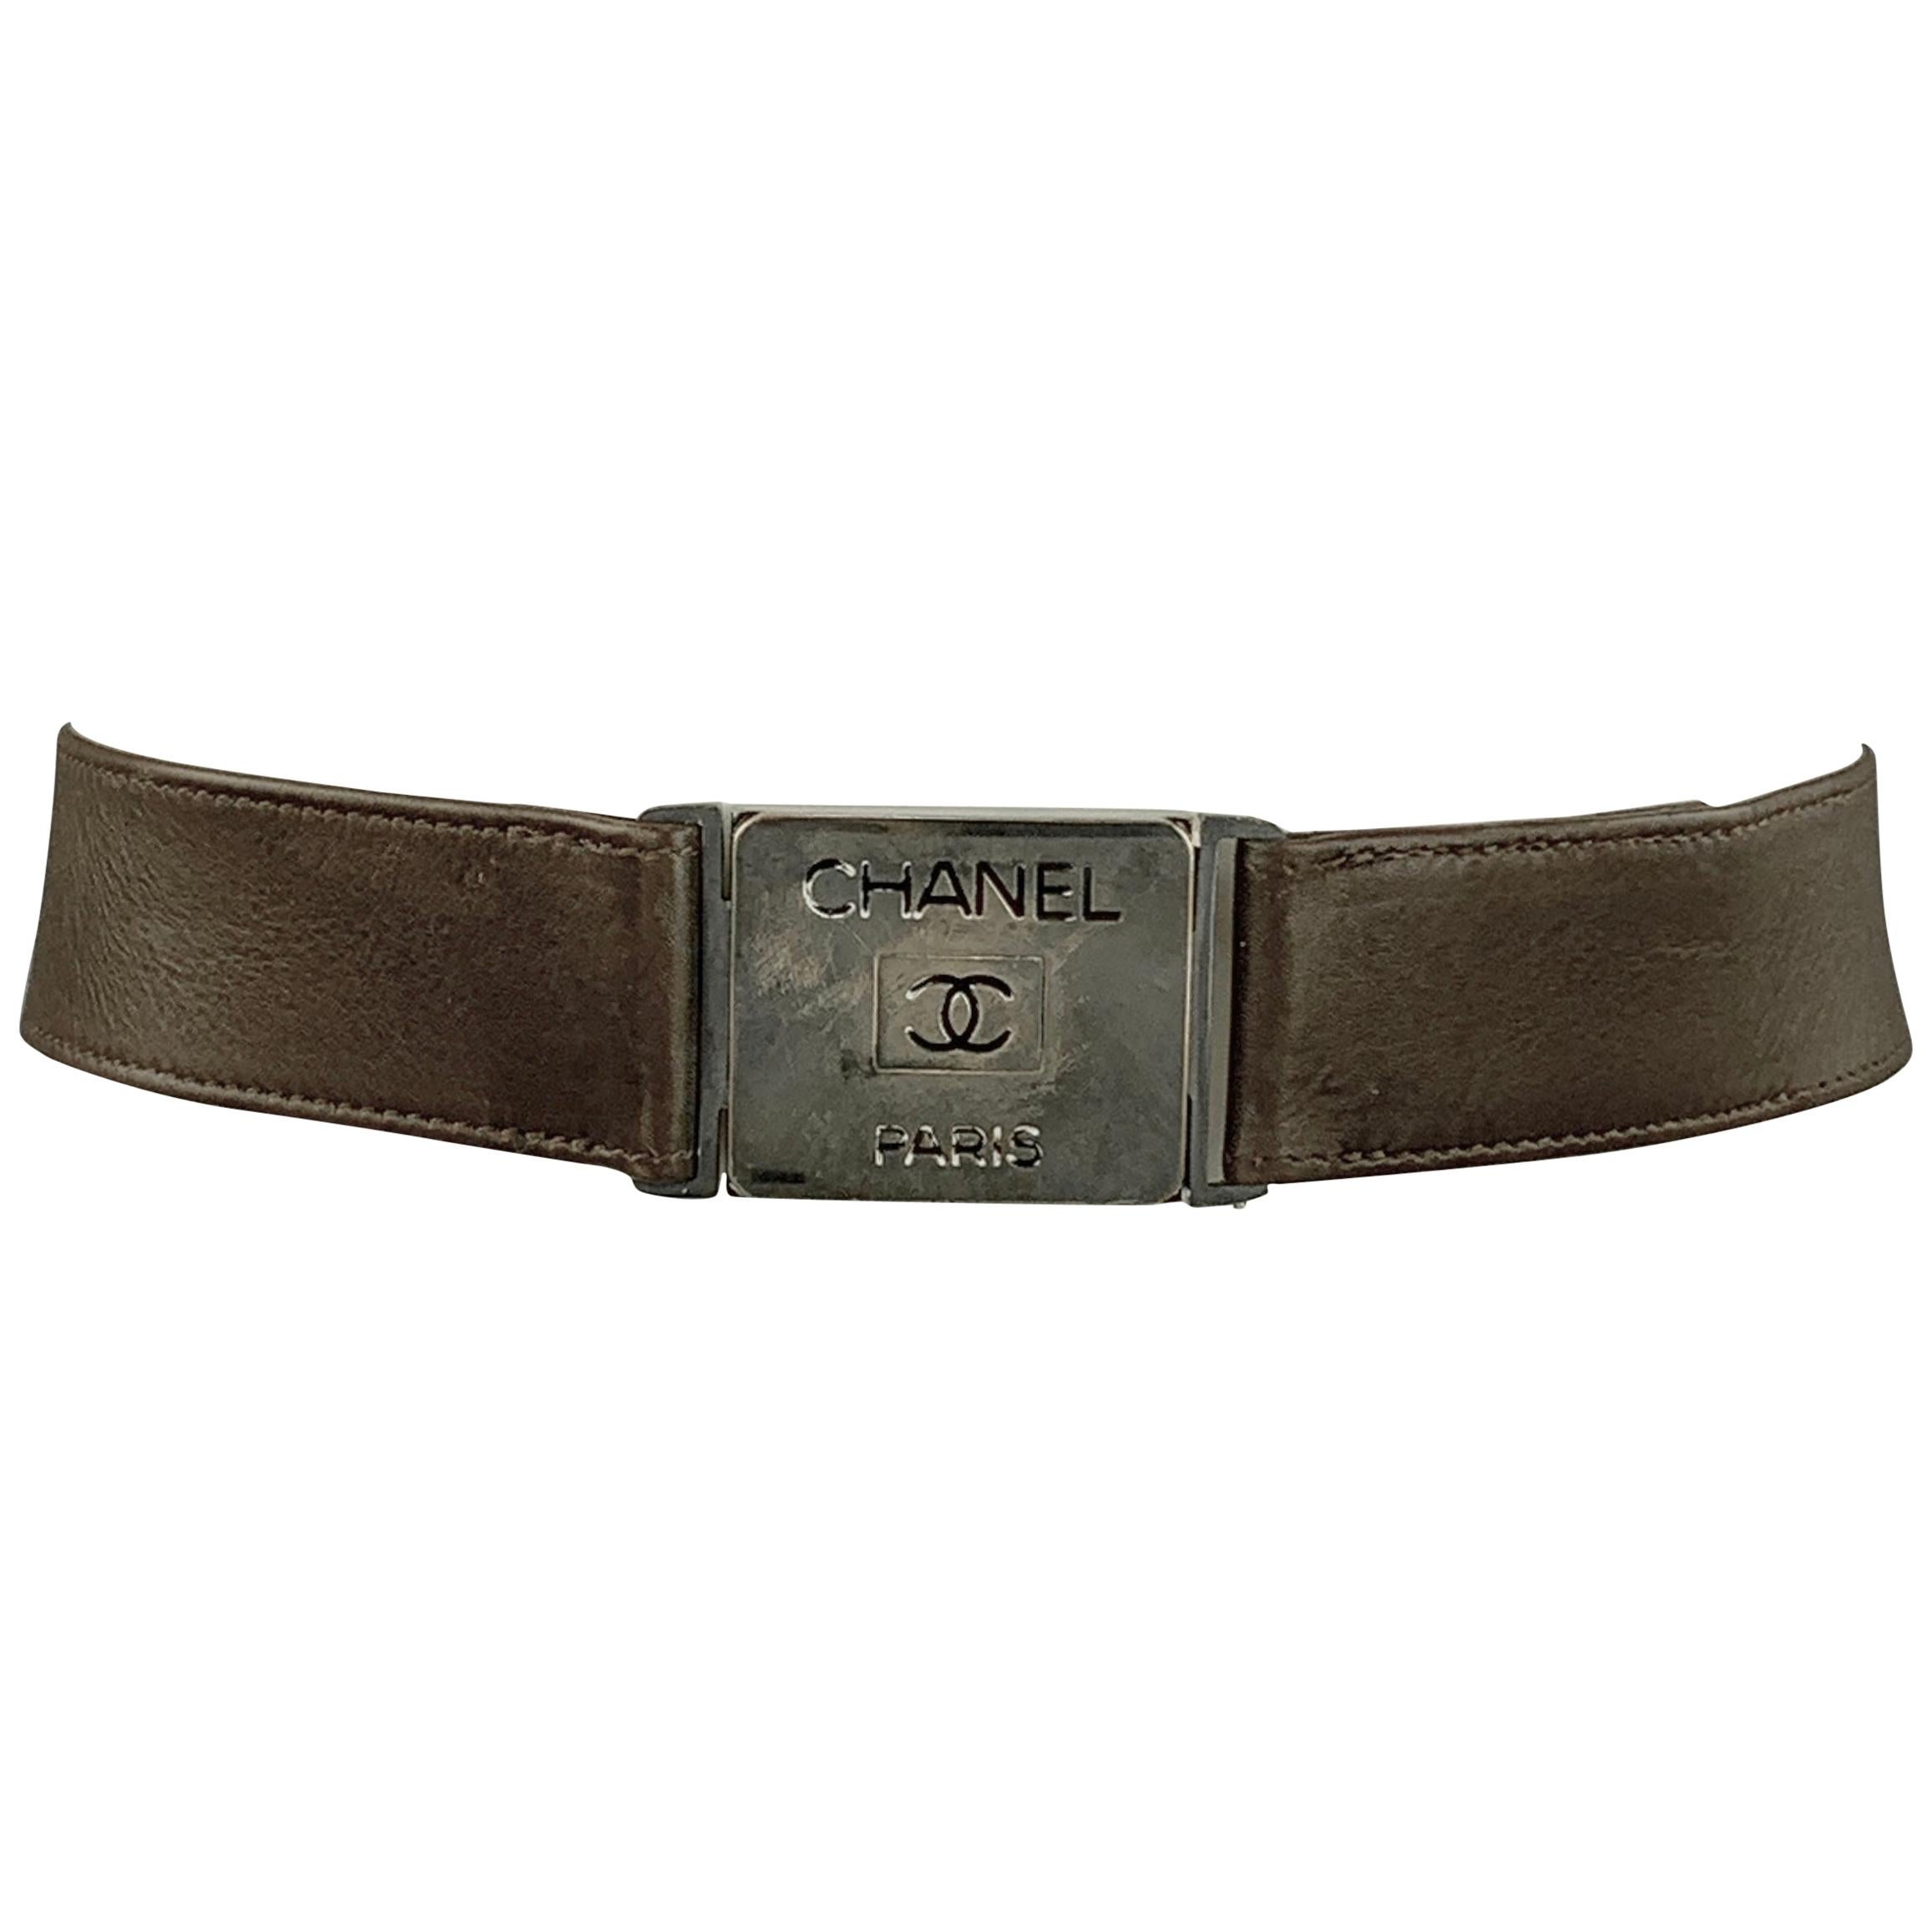 CHANEL Brown leather Silver CC Buckle '96 Belt